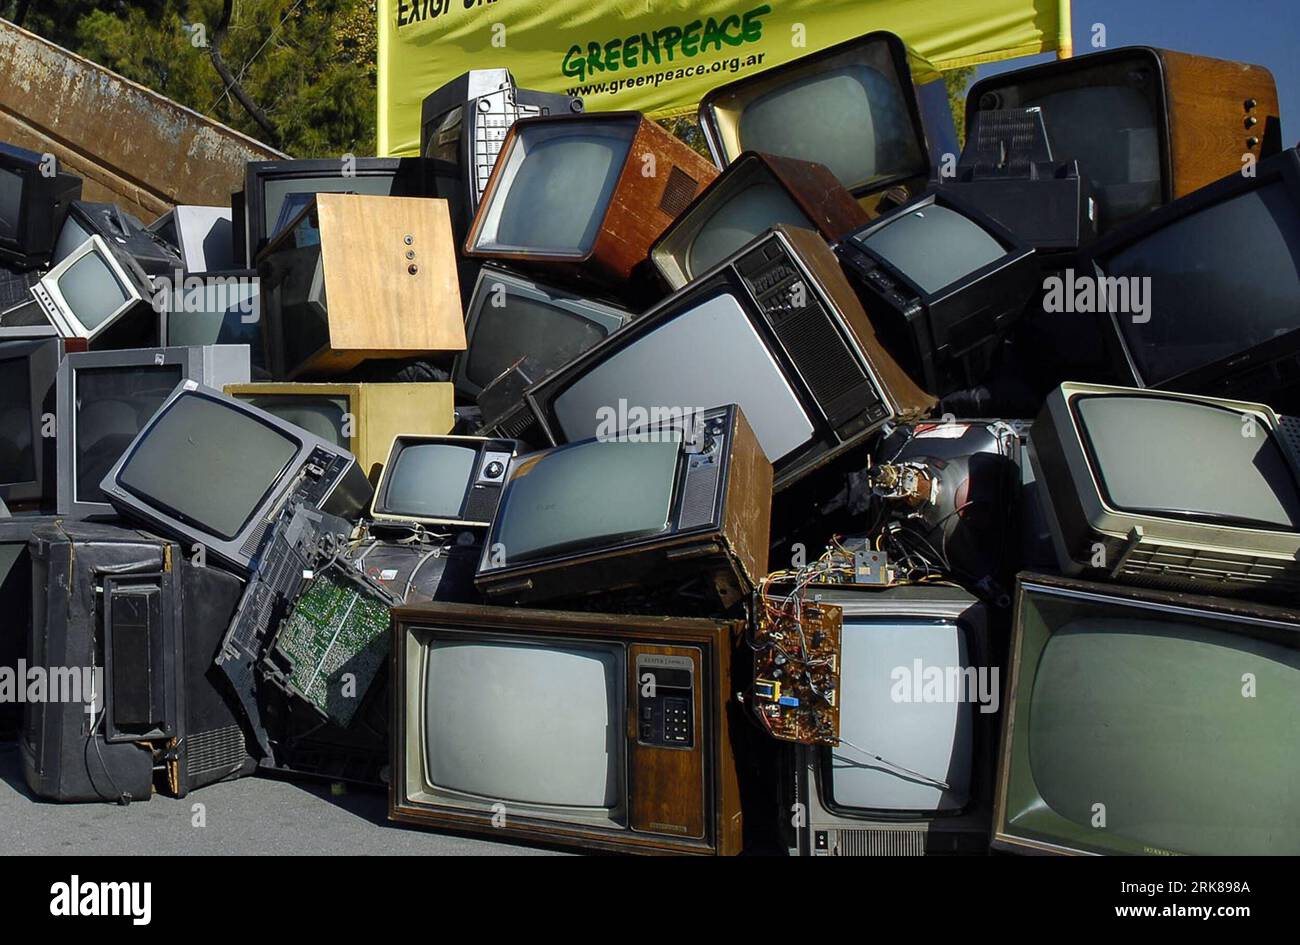 100430 -- BUENOS AIRES, April 30, 2010 Xinhua -- Unused television sets are placed in a pile during a demonstration held by Greenpeace in Buenos Aires, Argentina, April 29, 2010. Greenpeace activists held a demonstration appealing for the government to make laws for electrical and electronic wastes recycling in Buenos Aires. Xinhua/Martin Katzaxy 2ARGENTINA-BUENOS AIRES-GREENPEACE-DEMONSTRATION PUBLICATIONxNOTxINxCHN Stock Photo